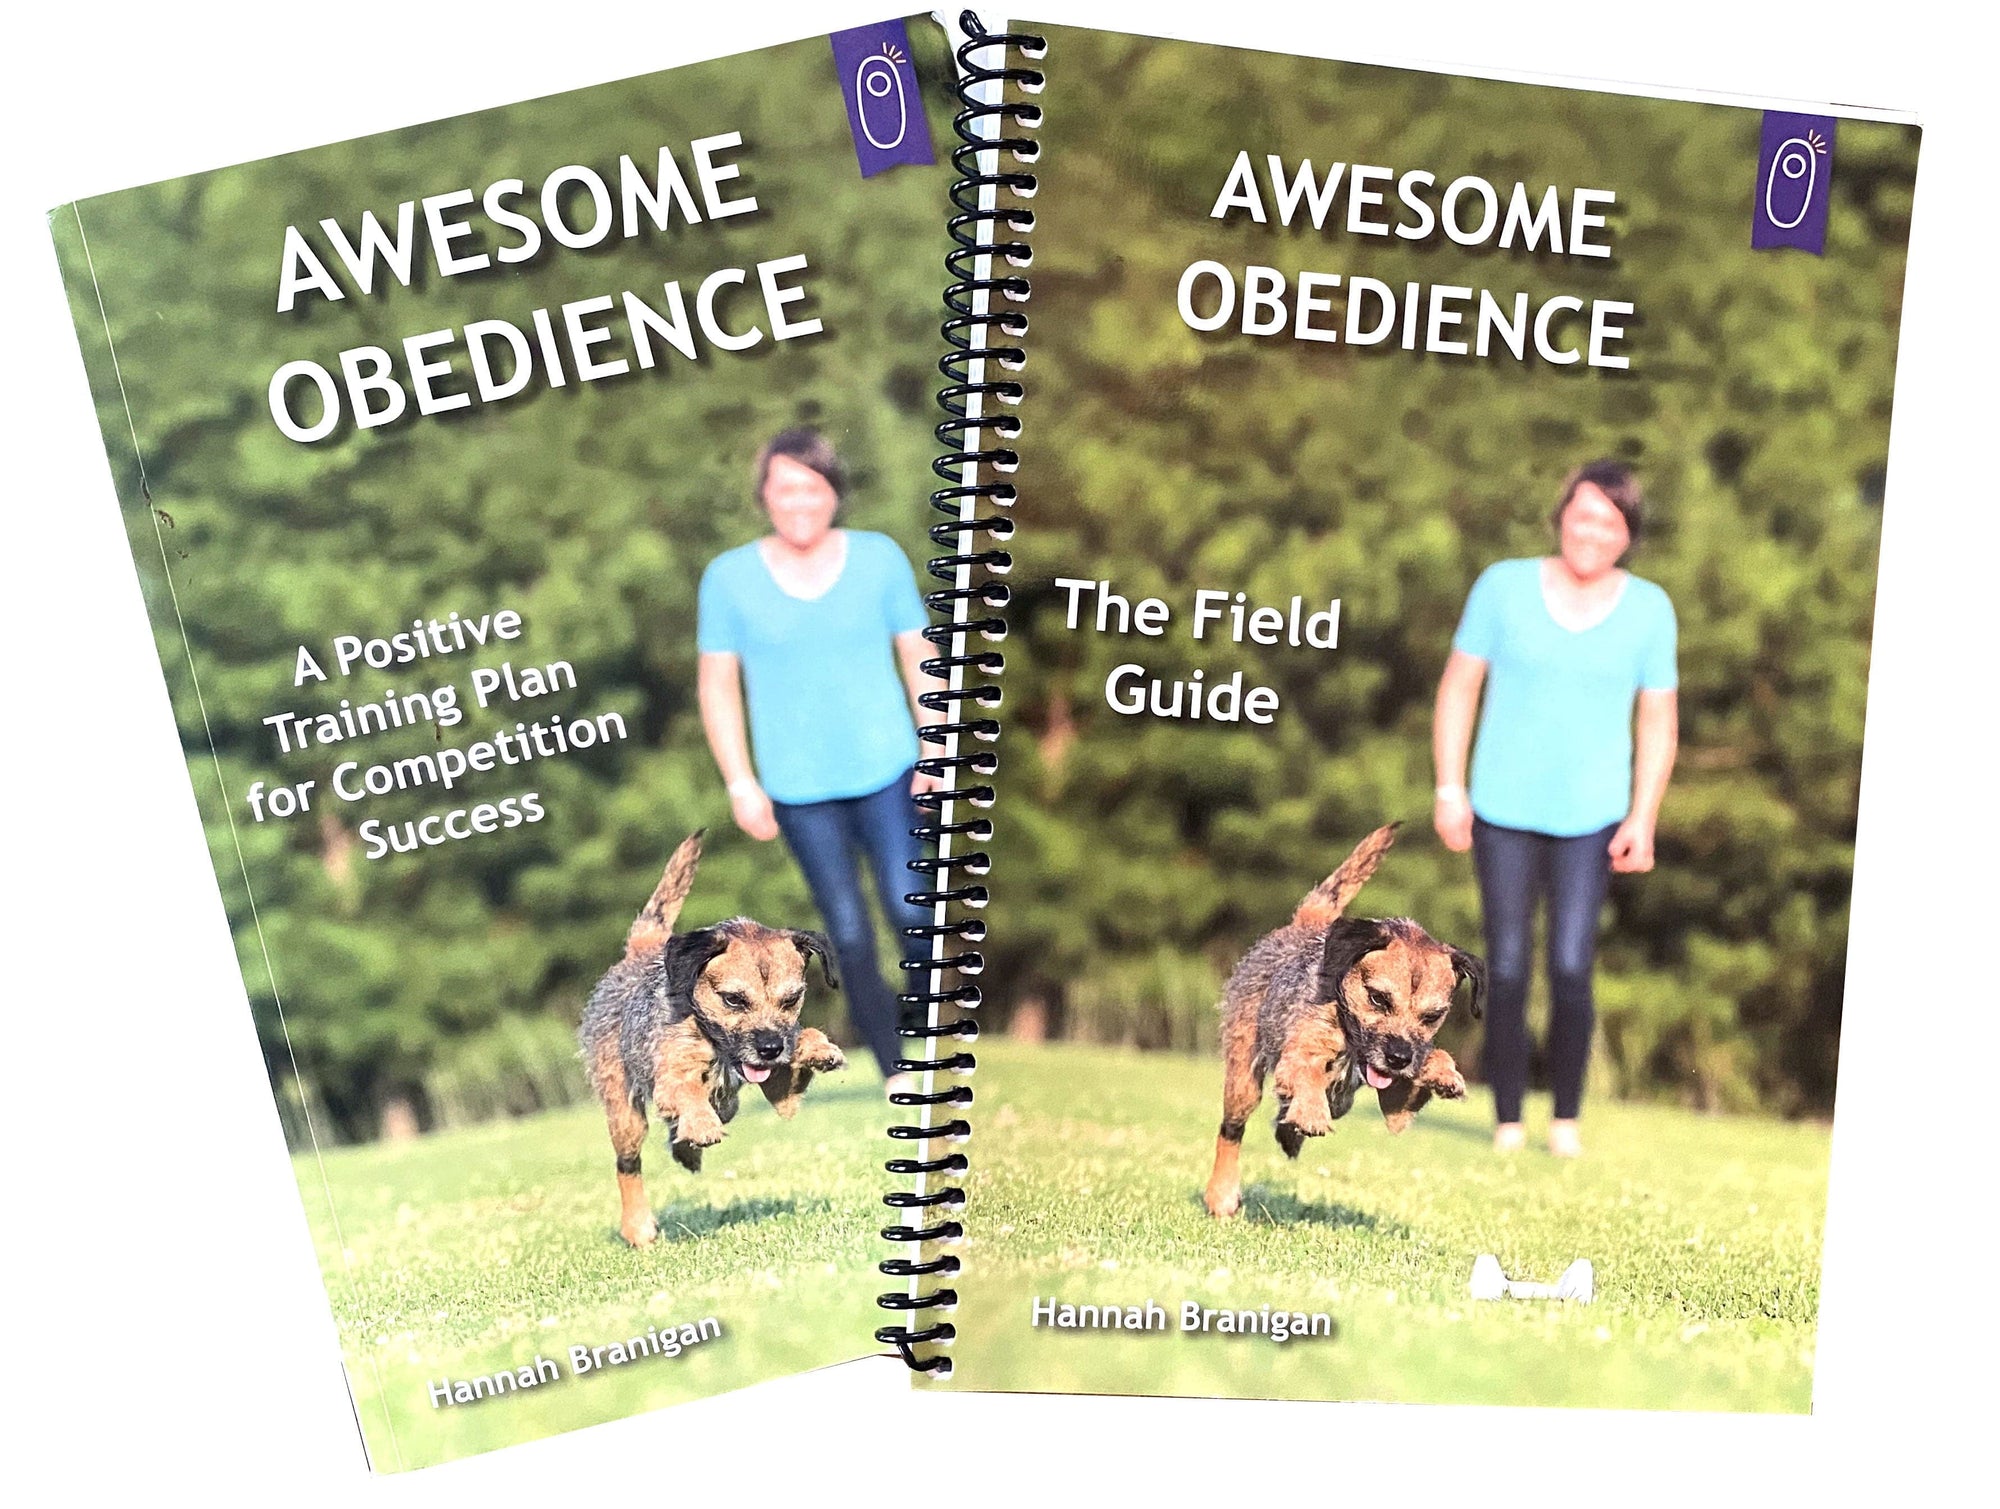 Awesome Obedience: A Positive Training Plan for Competition Success by Hannah Branigan